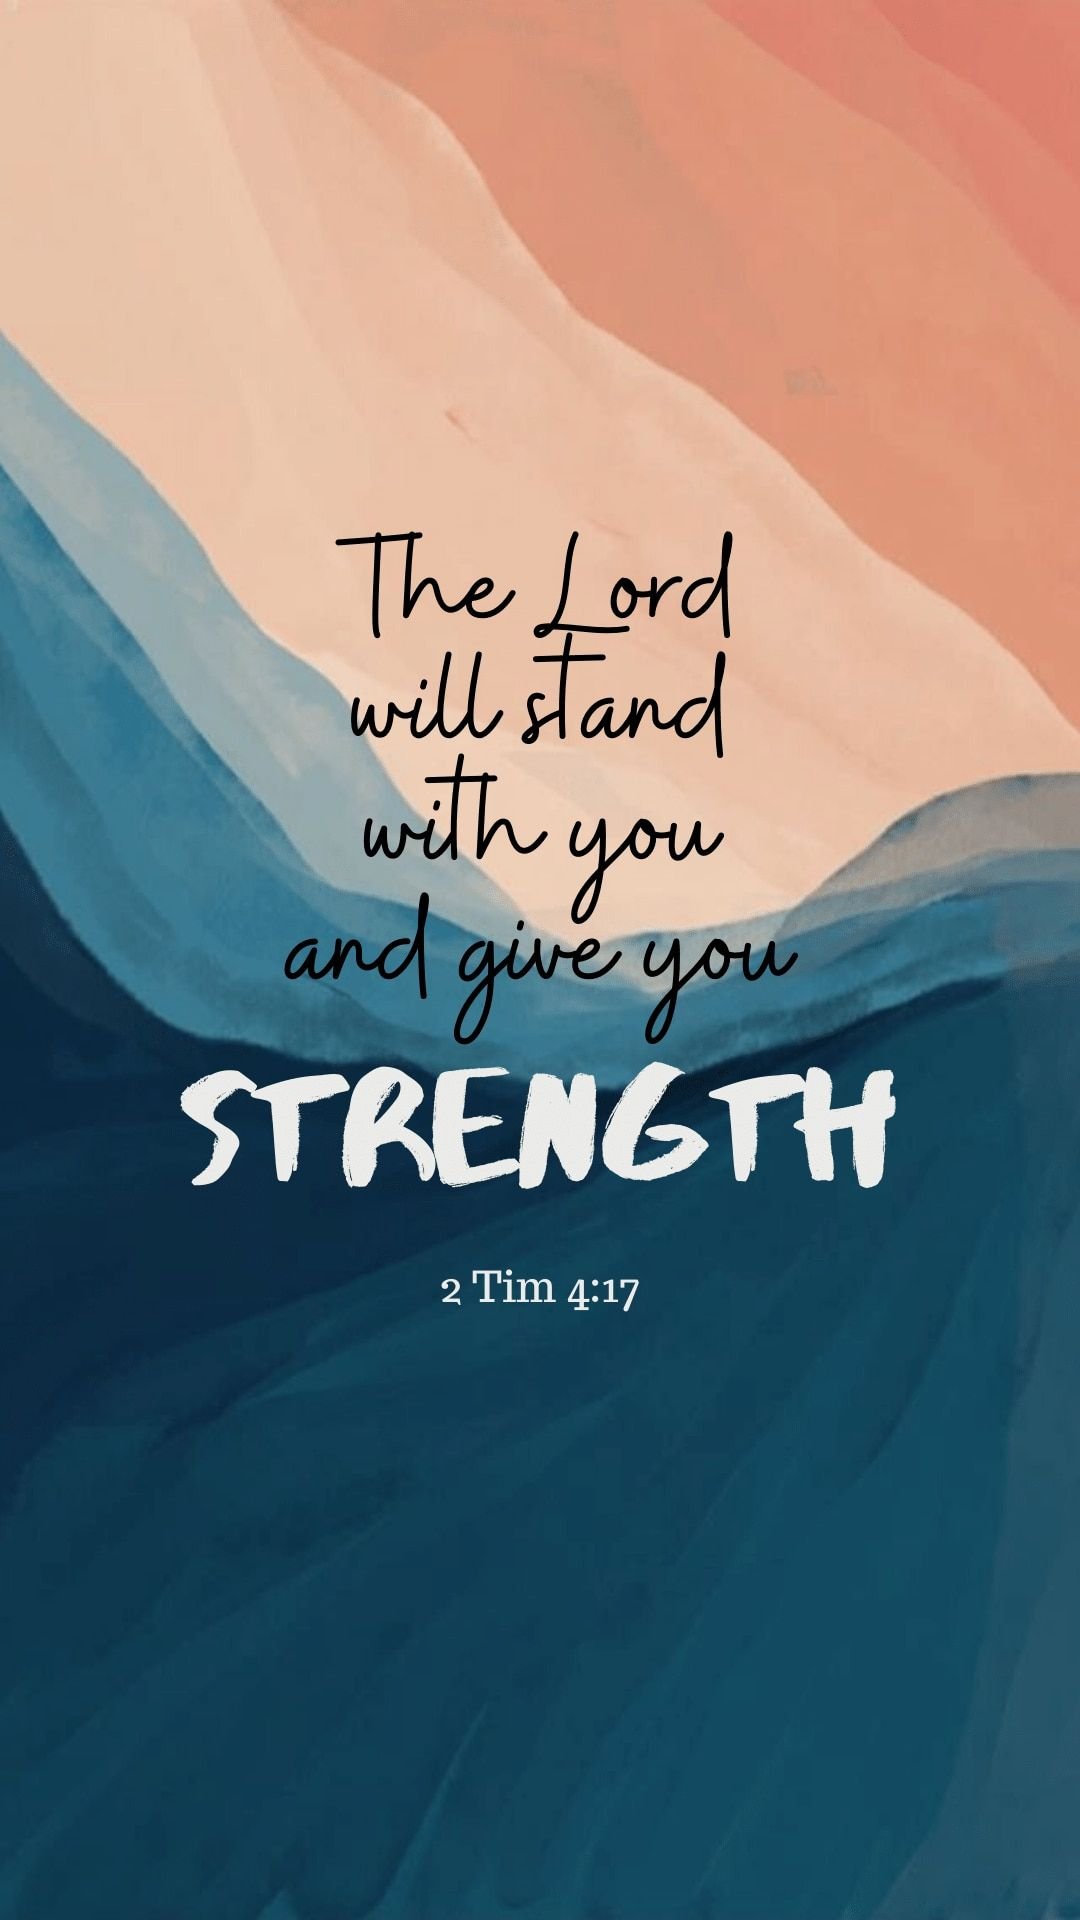 10 Bible Verse Wallpapers to Encourage You Today | LCBC Church